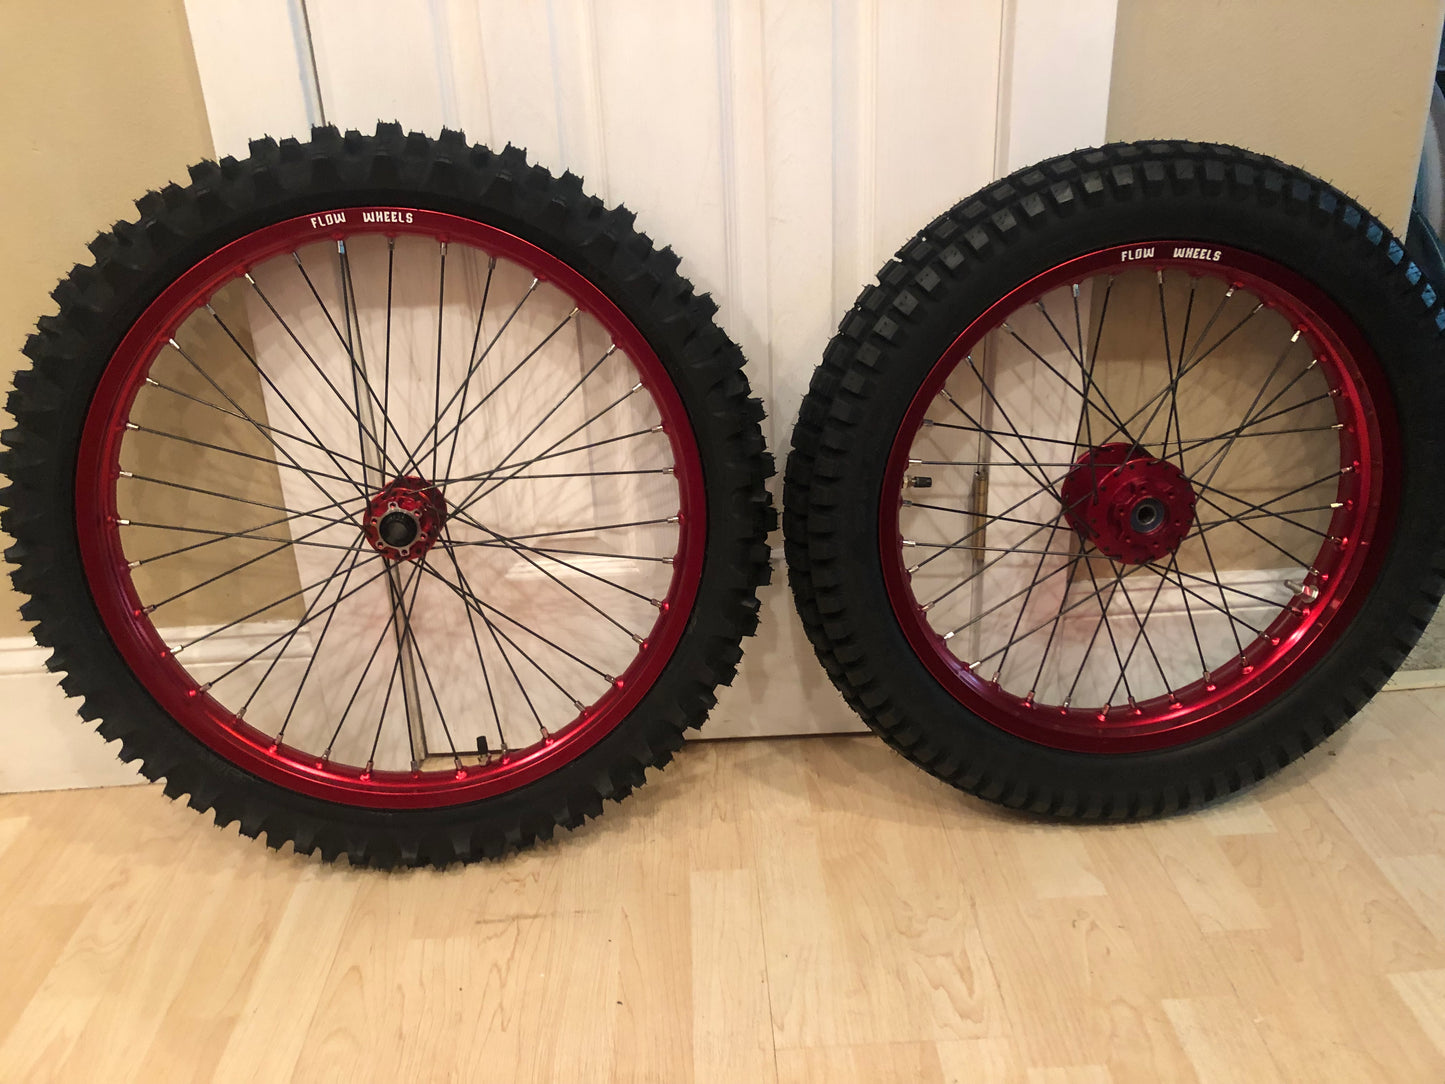 Surron or Talaria Sting complete 21", 18" wheelset with tires